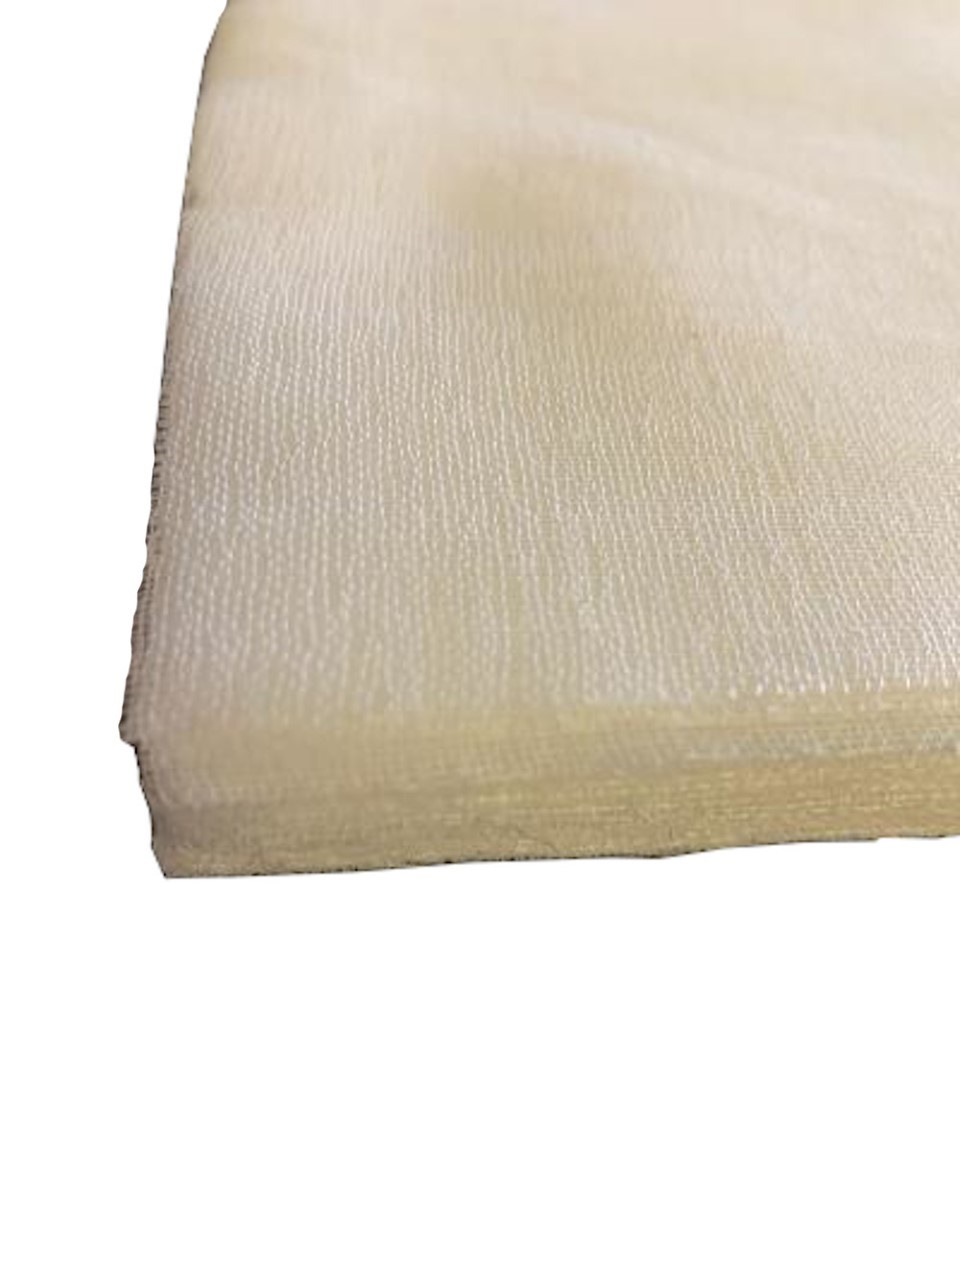 18" x 18" Grade 90 Cheesecloth Bleached Squares 100 Pk - Click Image to Close